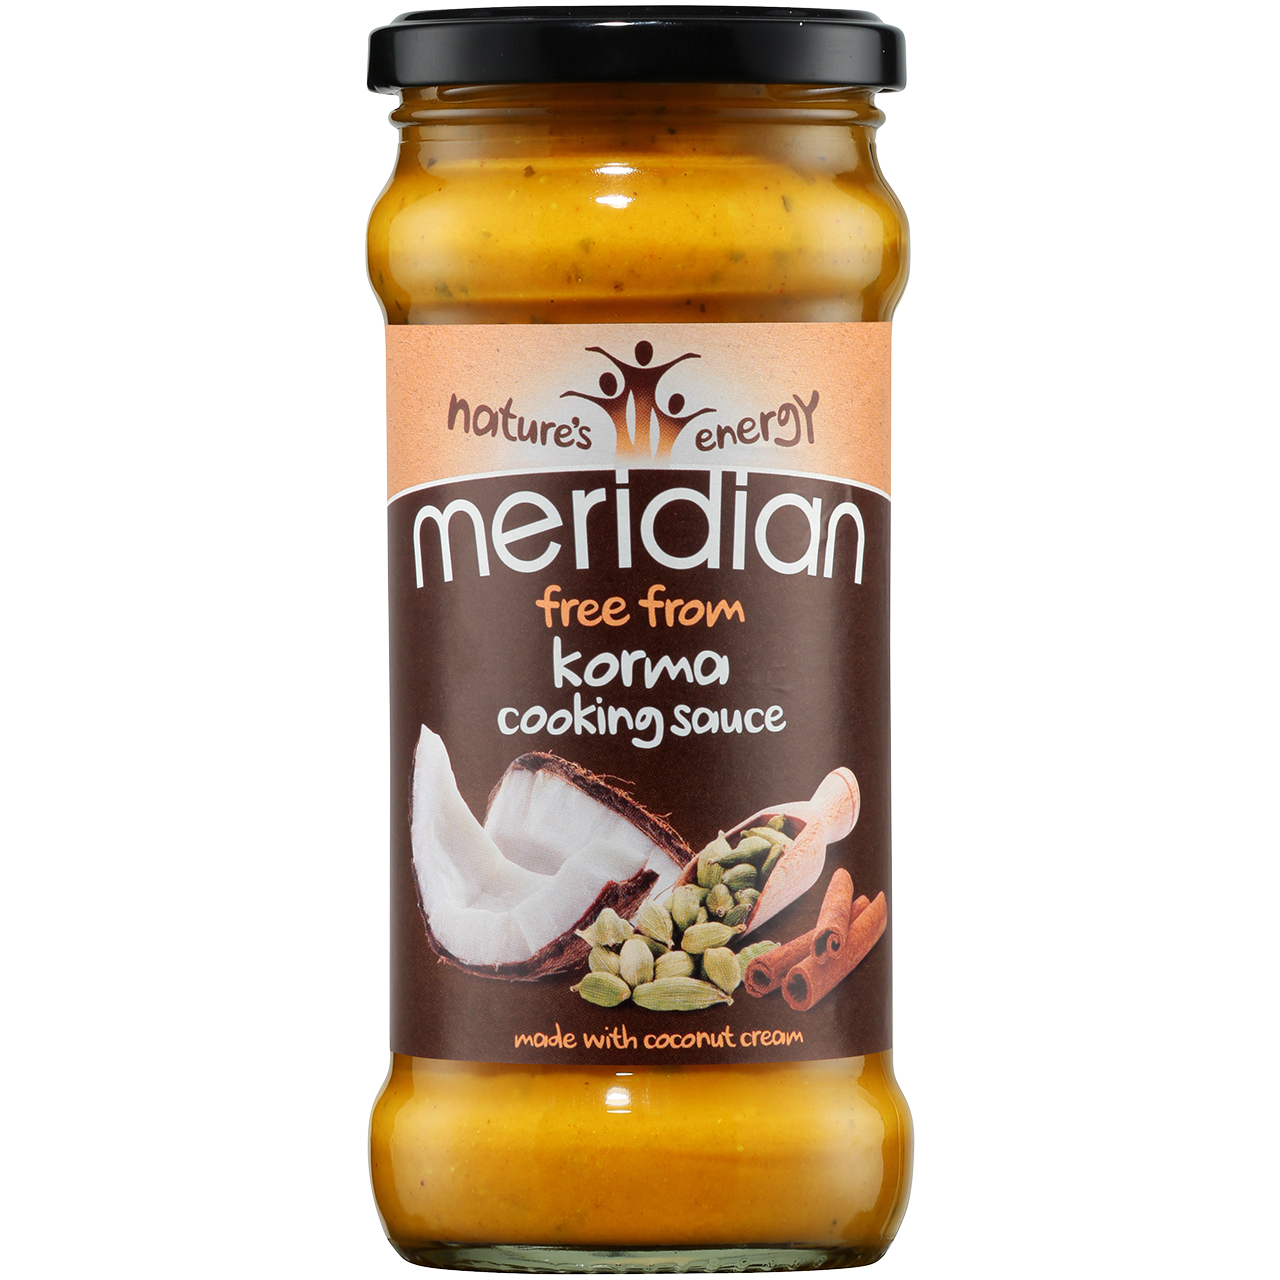 Meridian Free From Korma Cooking Sauce 350g - Just Natural